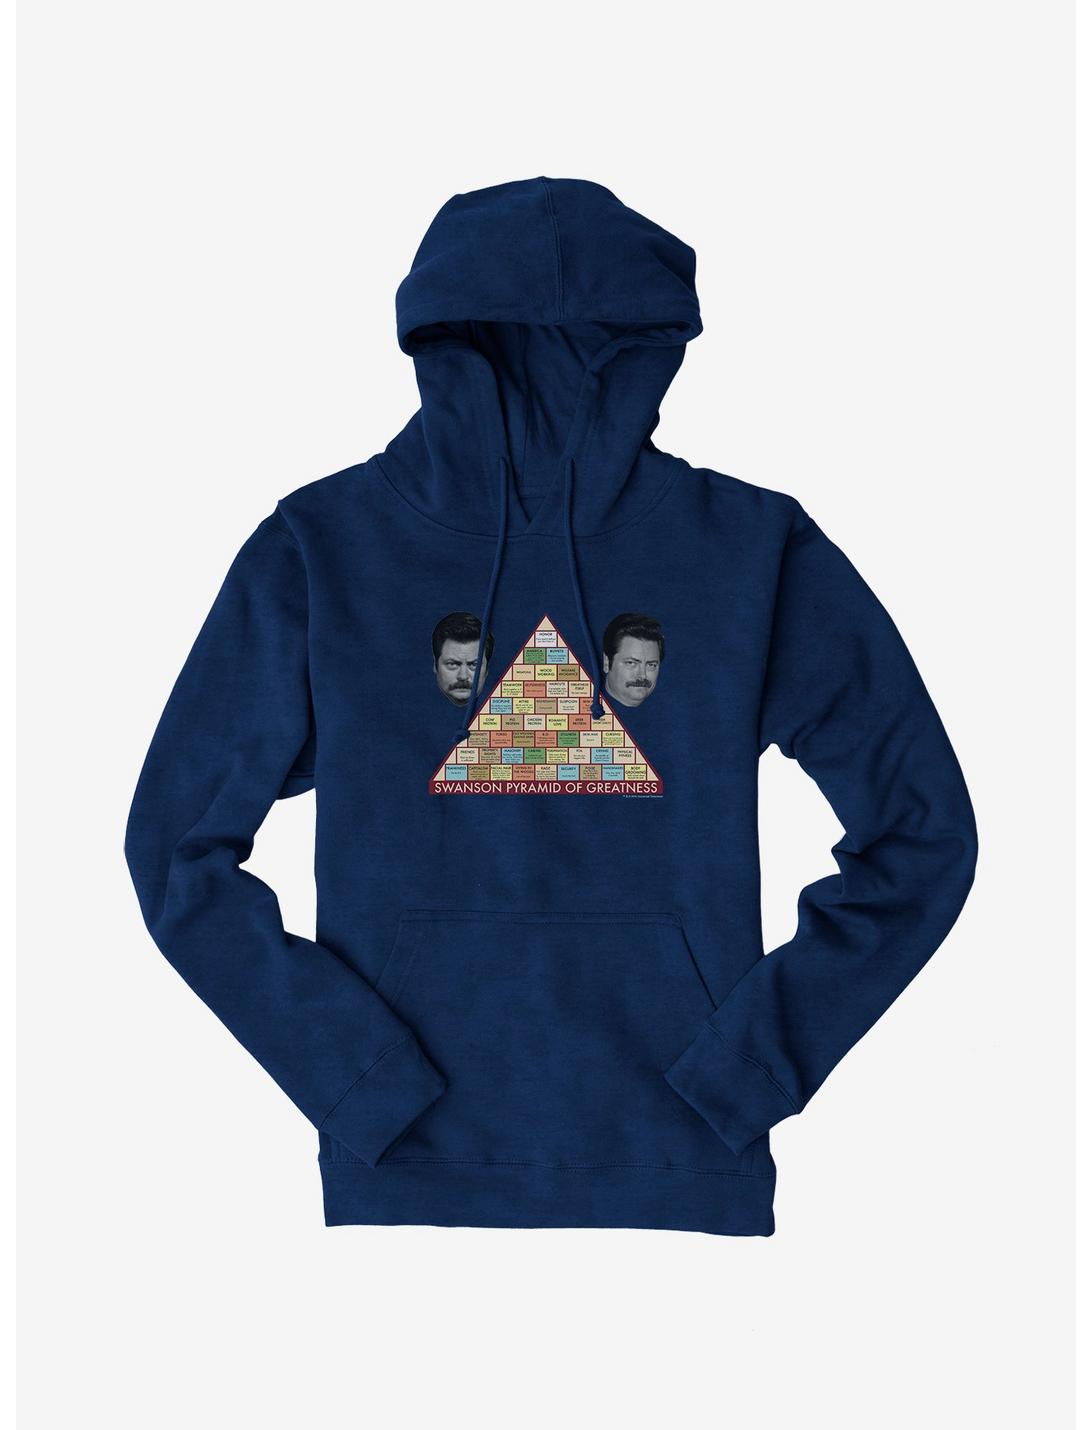 Parks And Recreation Swanson Pyramid Of Greatness Hoodie, , hi-res